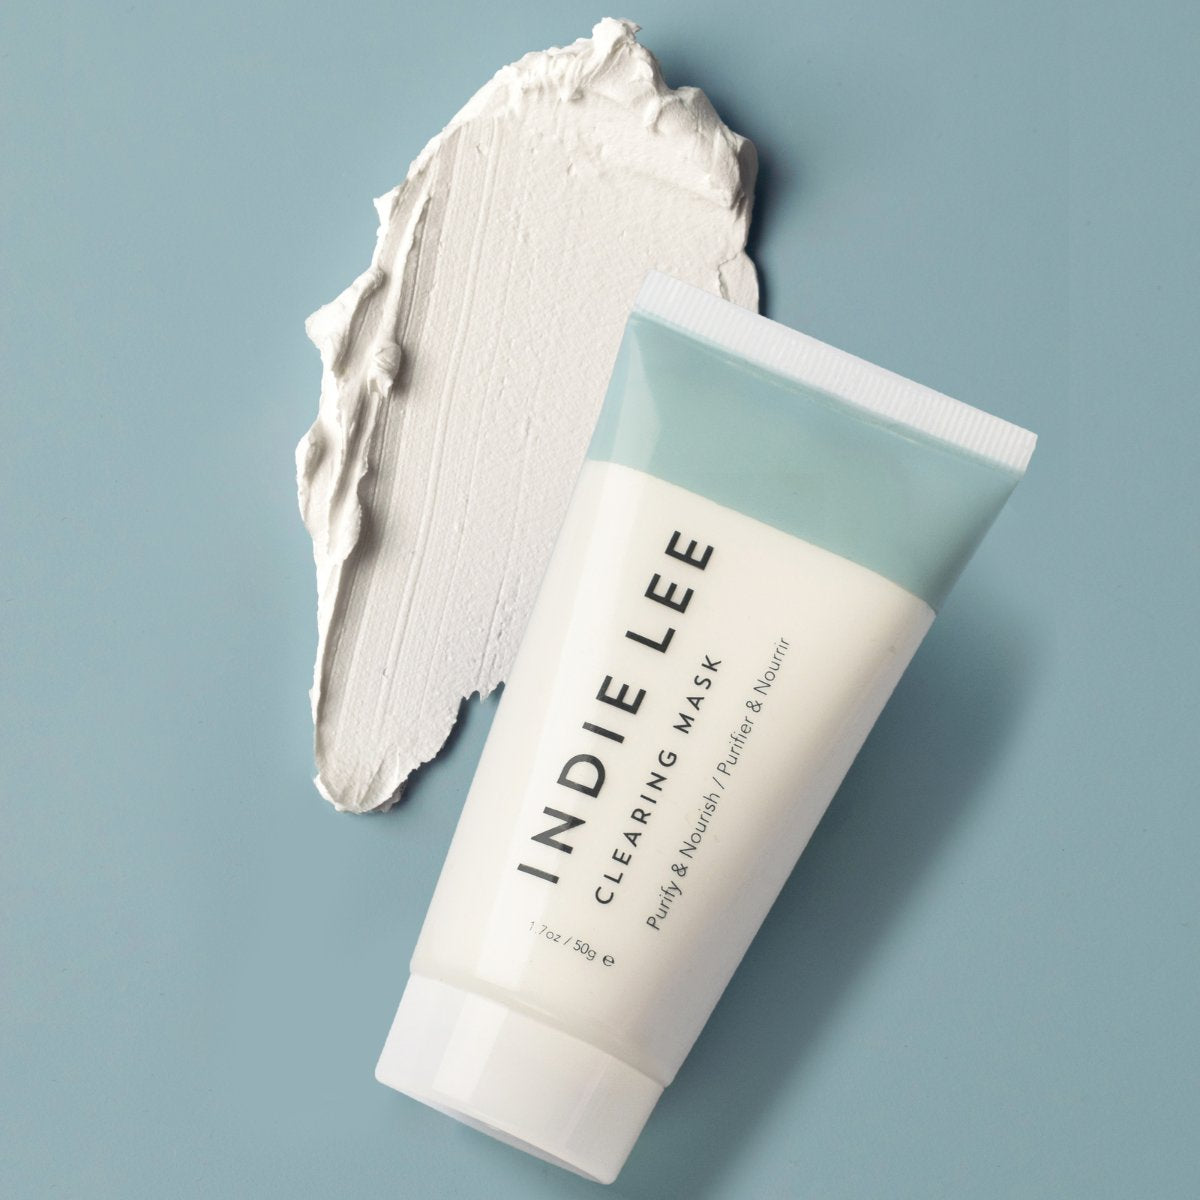 Indie Lee Clearing Mask - The Green Kiss